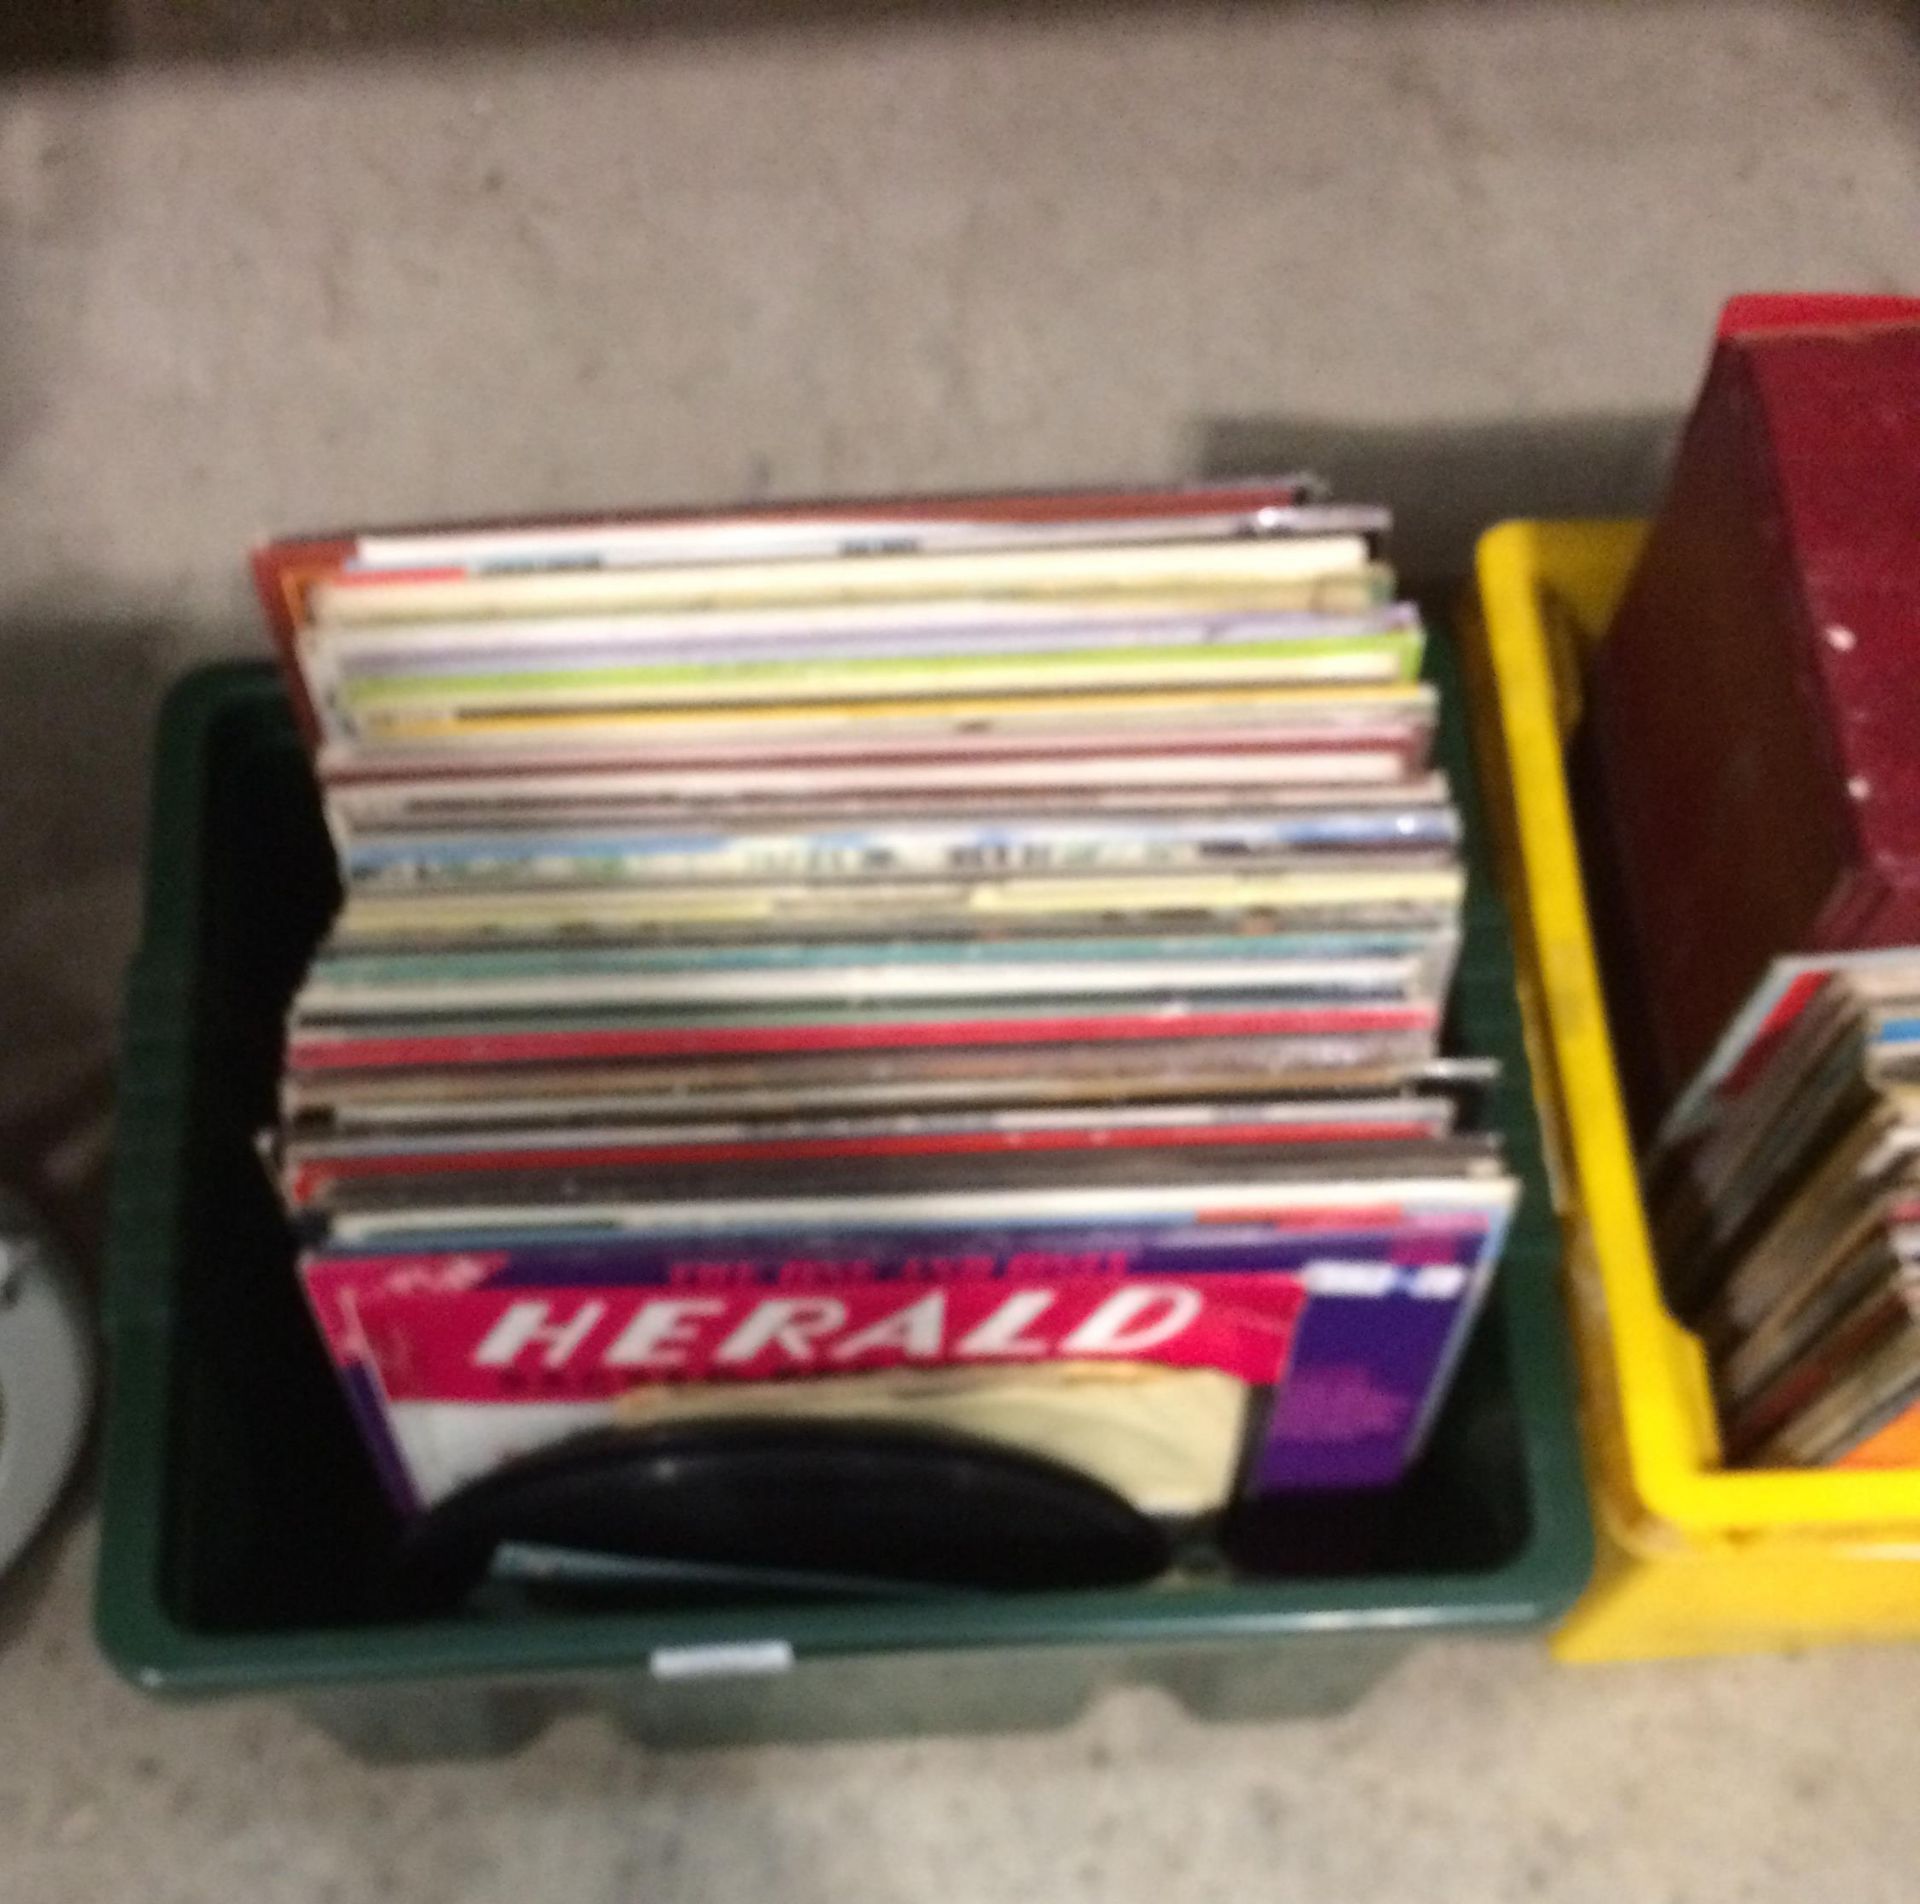 Contents to green plastic box - approximately 70 assorted LPs - many Spinners and other folk music, - Image 2 of 2